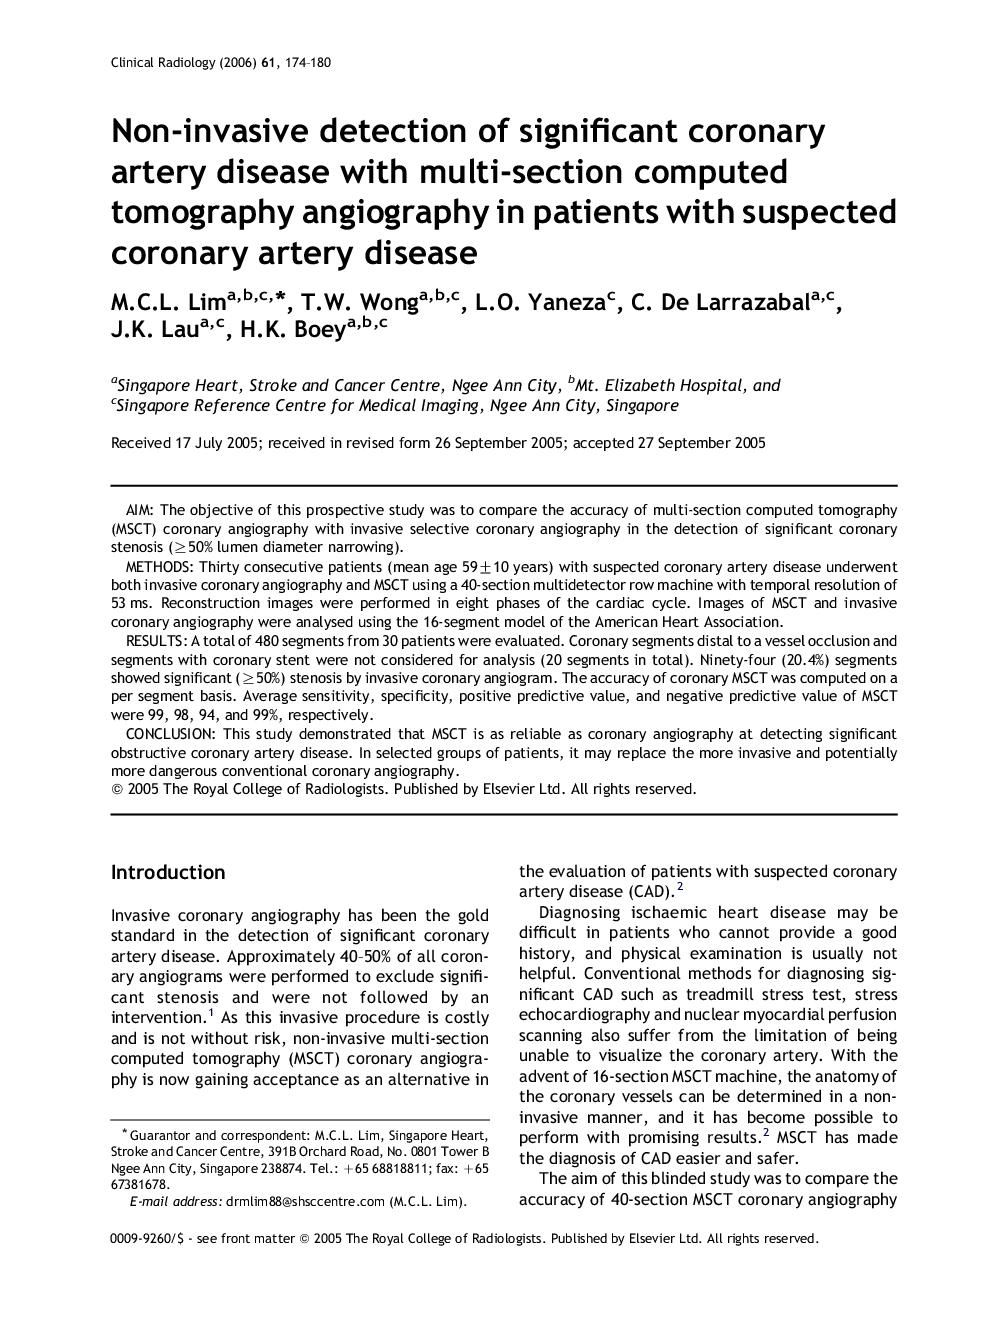 Non-invasive detection of significant coronary artery disease with multi-section computed tomography angiography in patients with suspected coronary artery disease